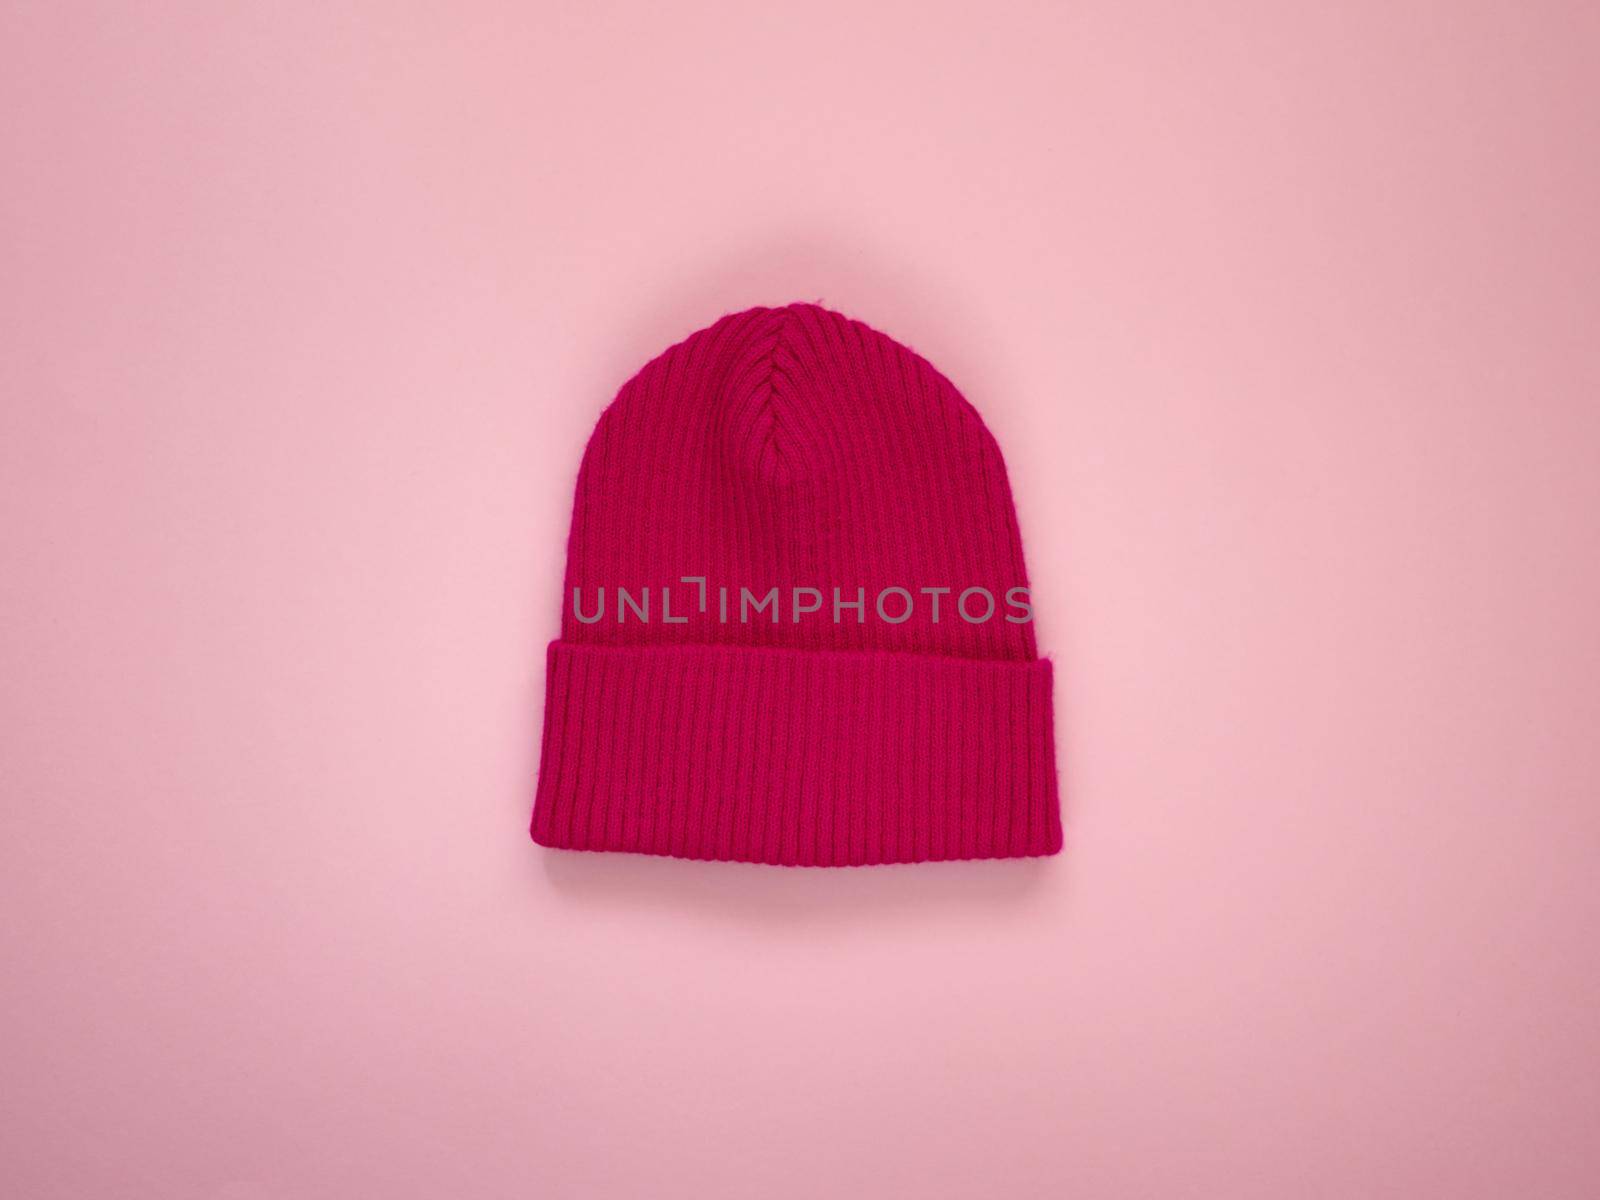 Colorful vivid knitted kids hat. Demi season autumn children's fashion wear. Top view on pink background.